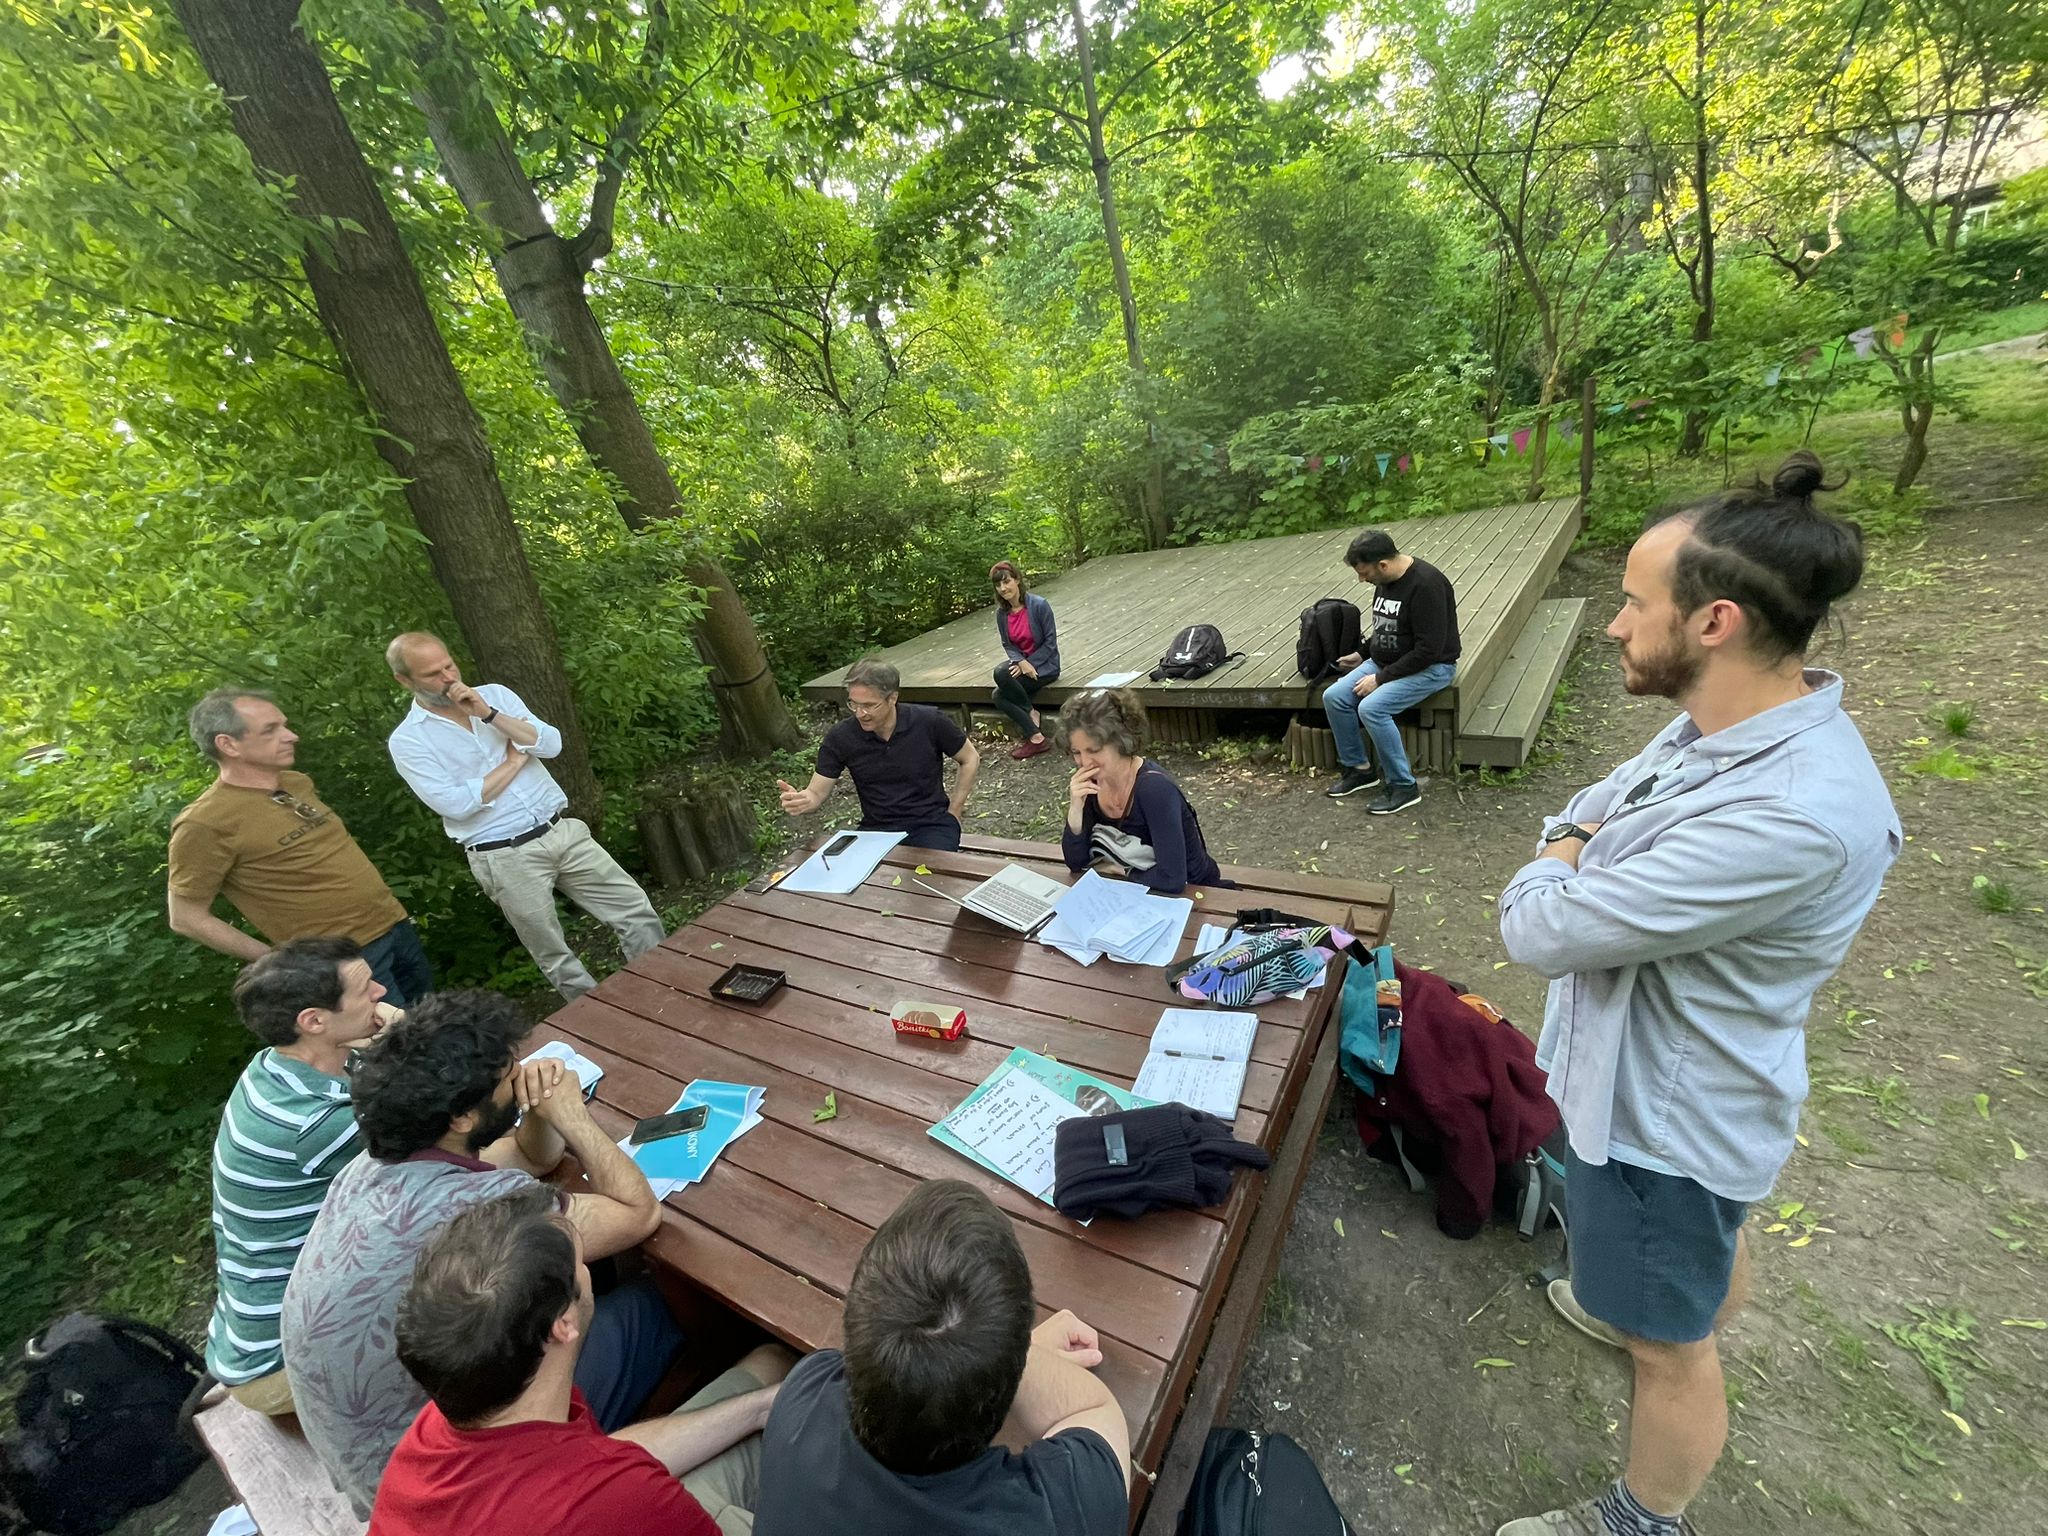 The ESI team in an outdoor workshop